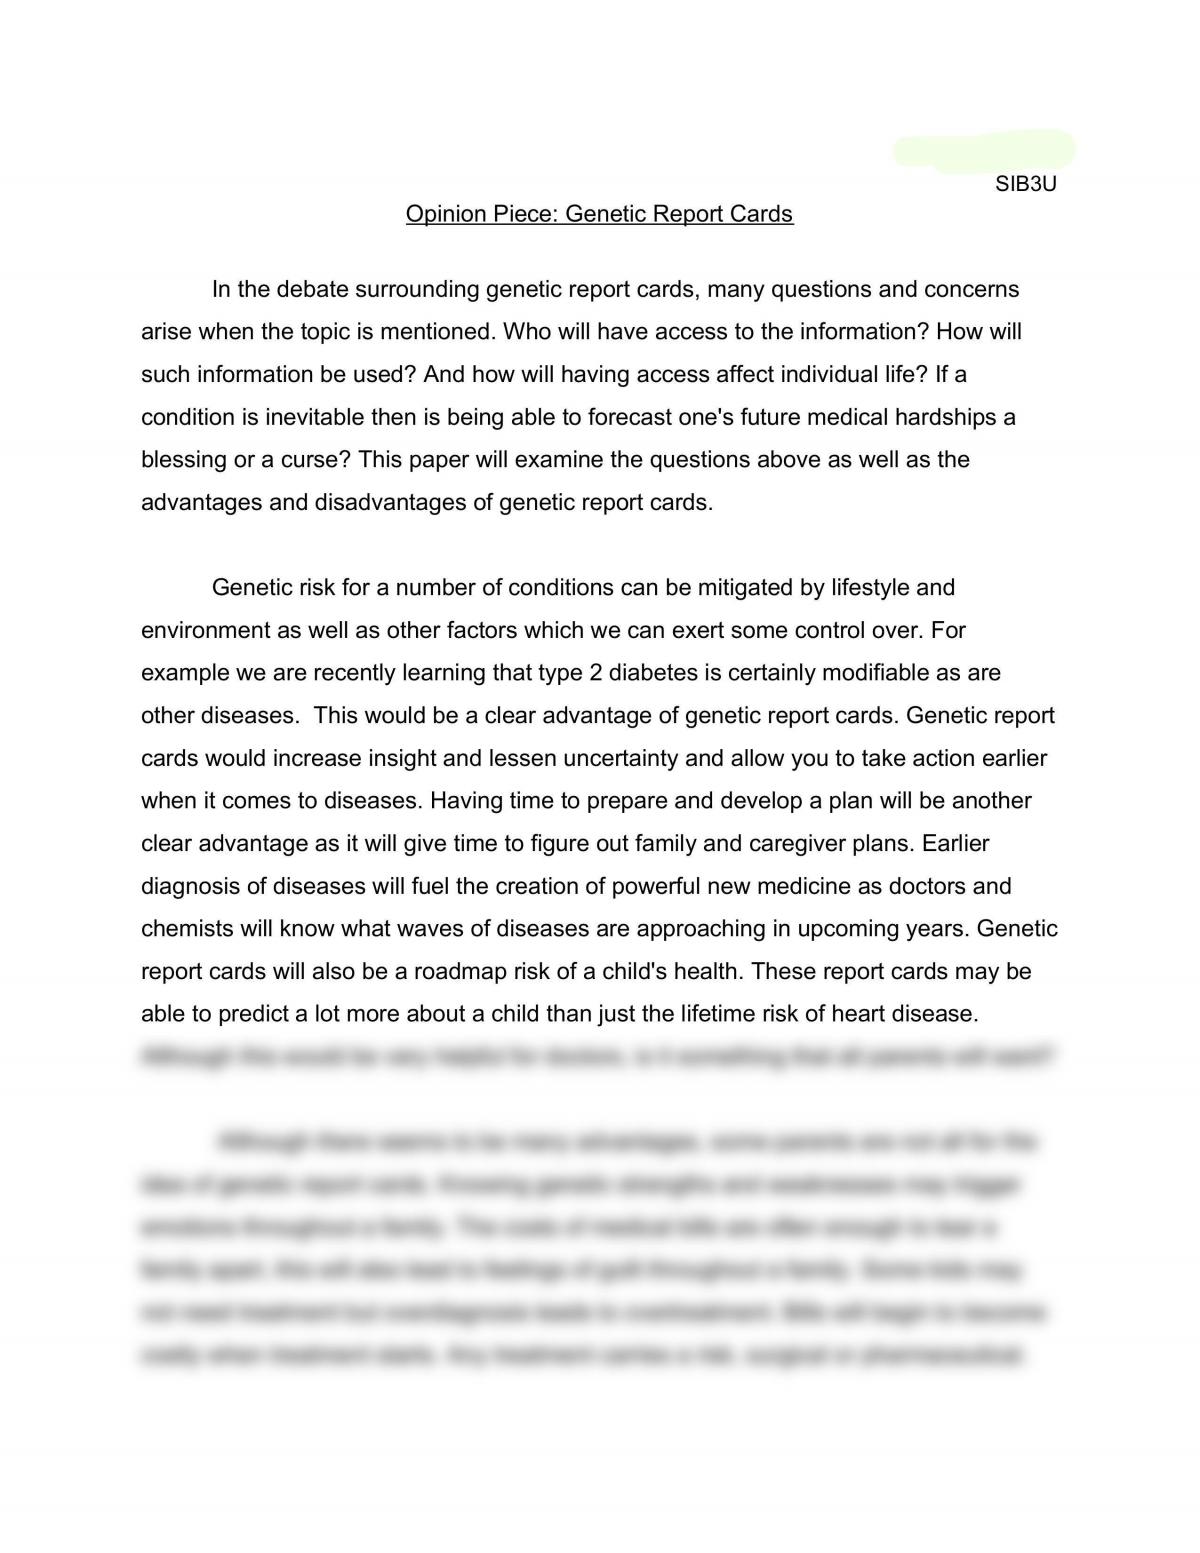 Genetic Report Cards; are they needed??  - Page 1